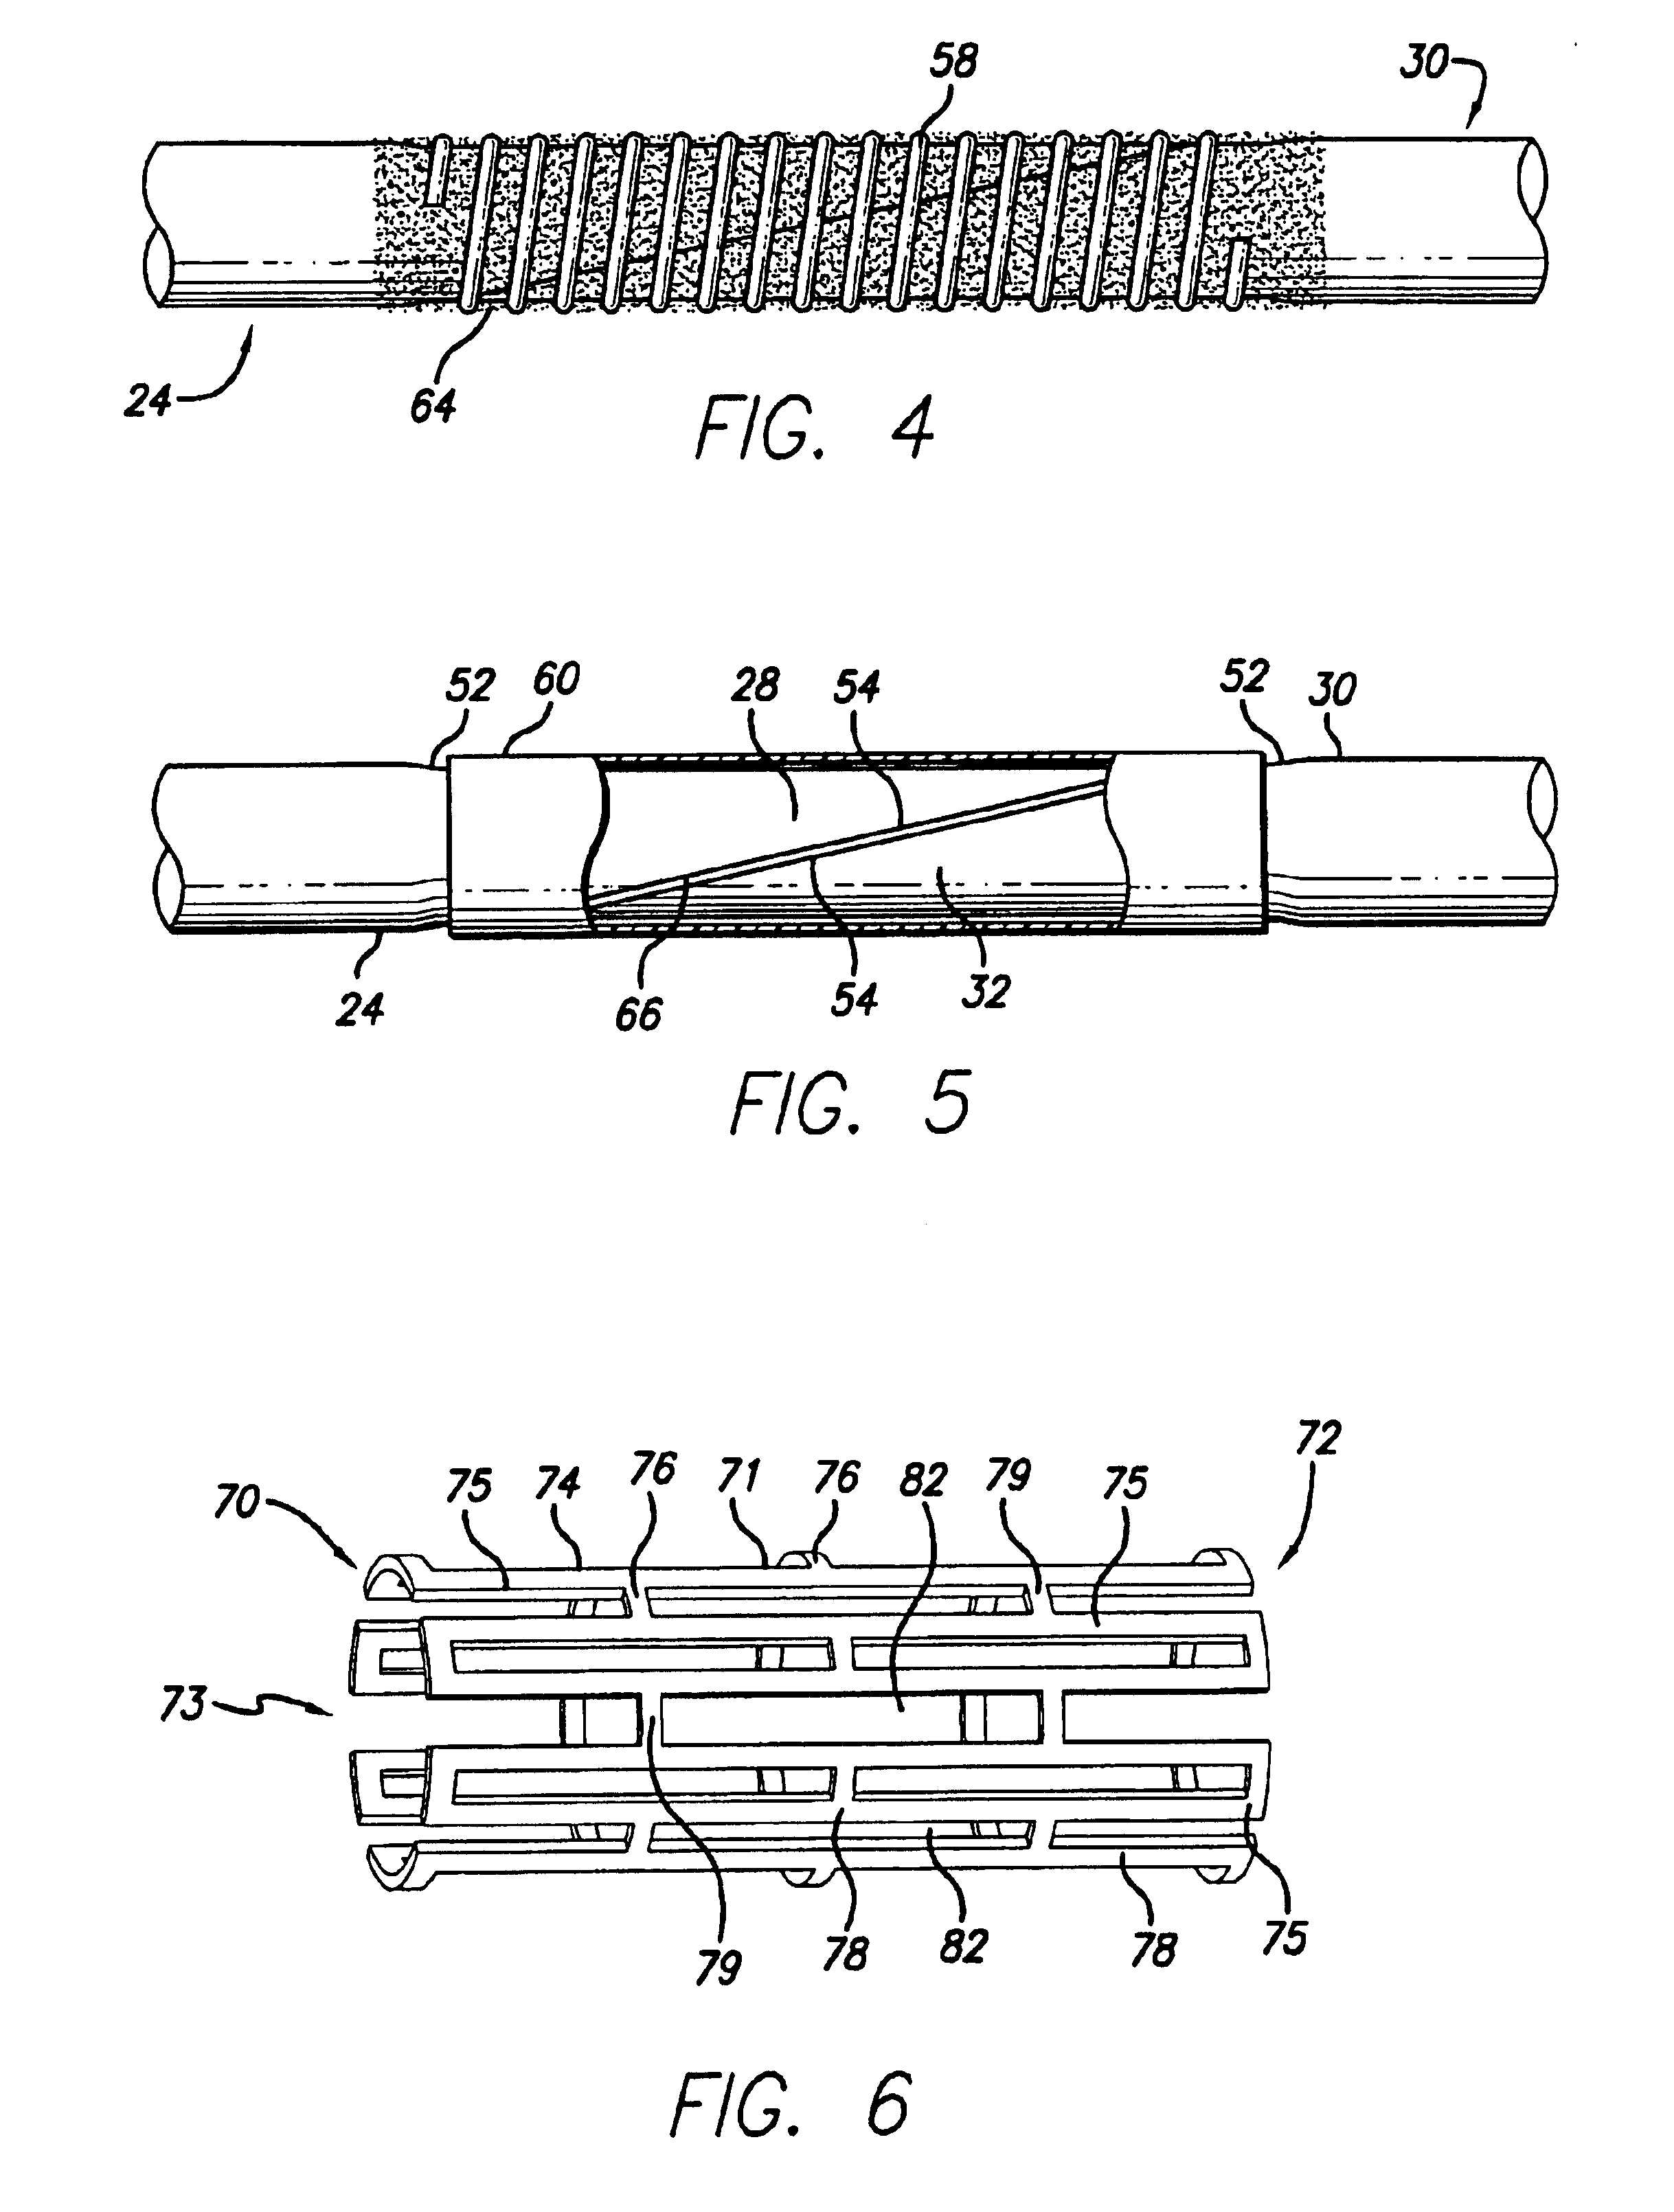 Enhanced method for joining two core wires